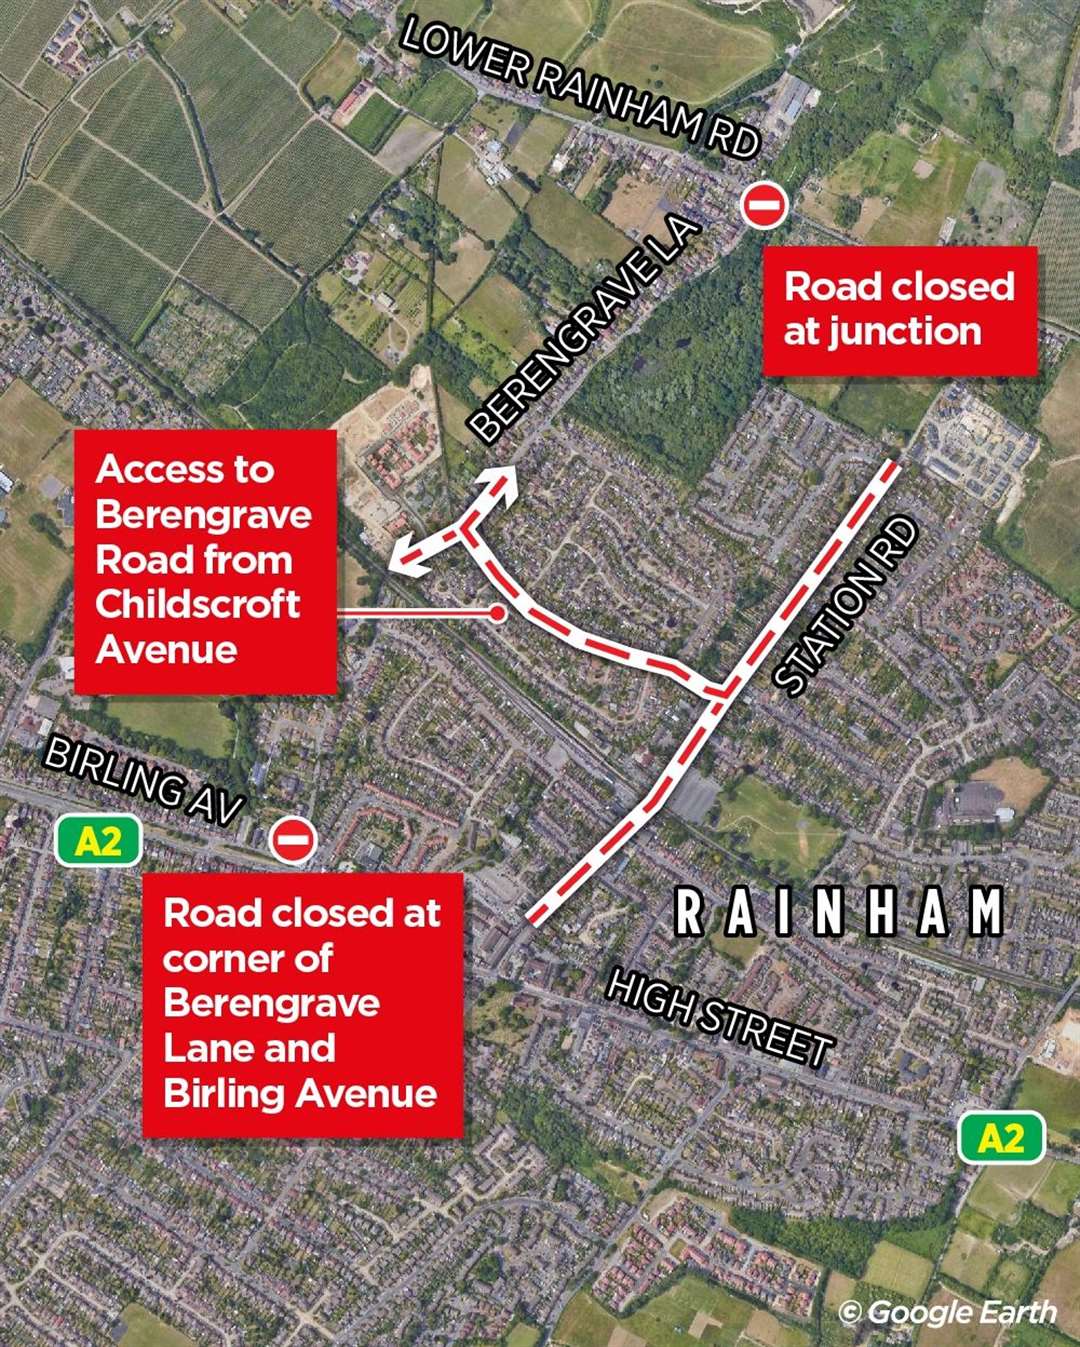 The diversion along Station Road and Childscroft Avenue